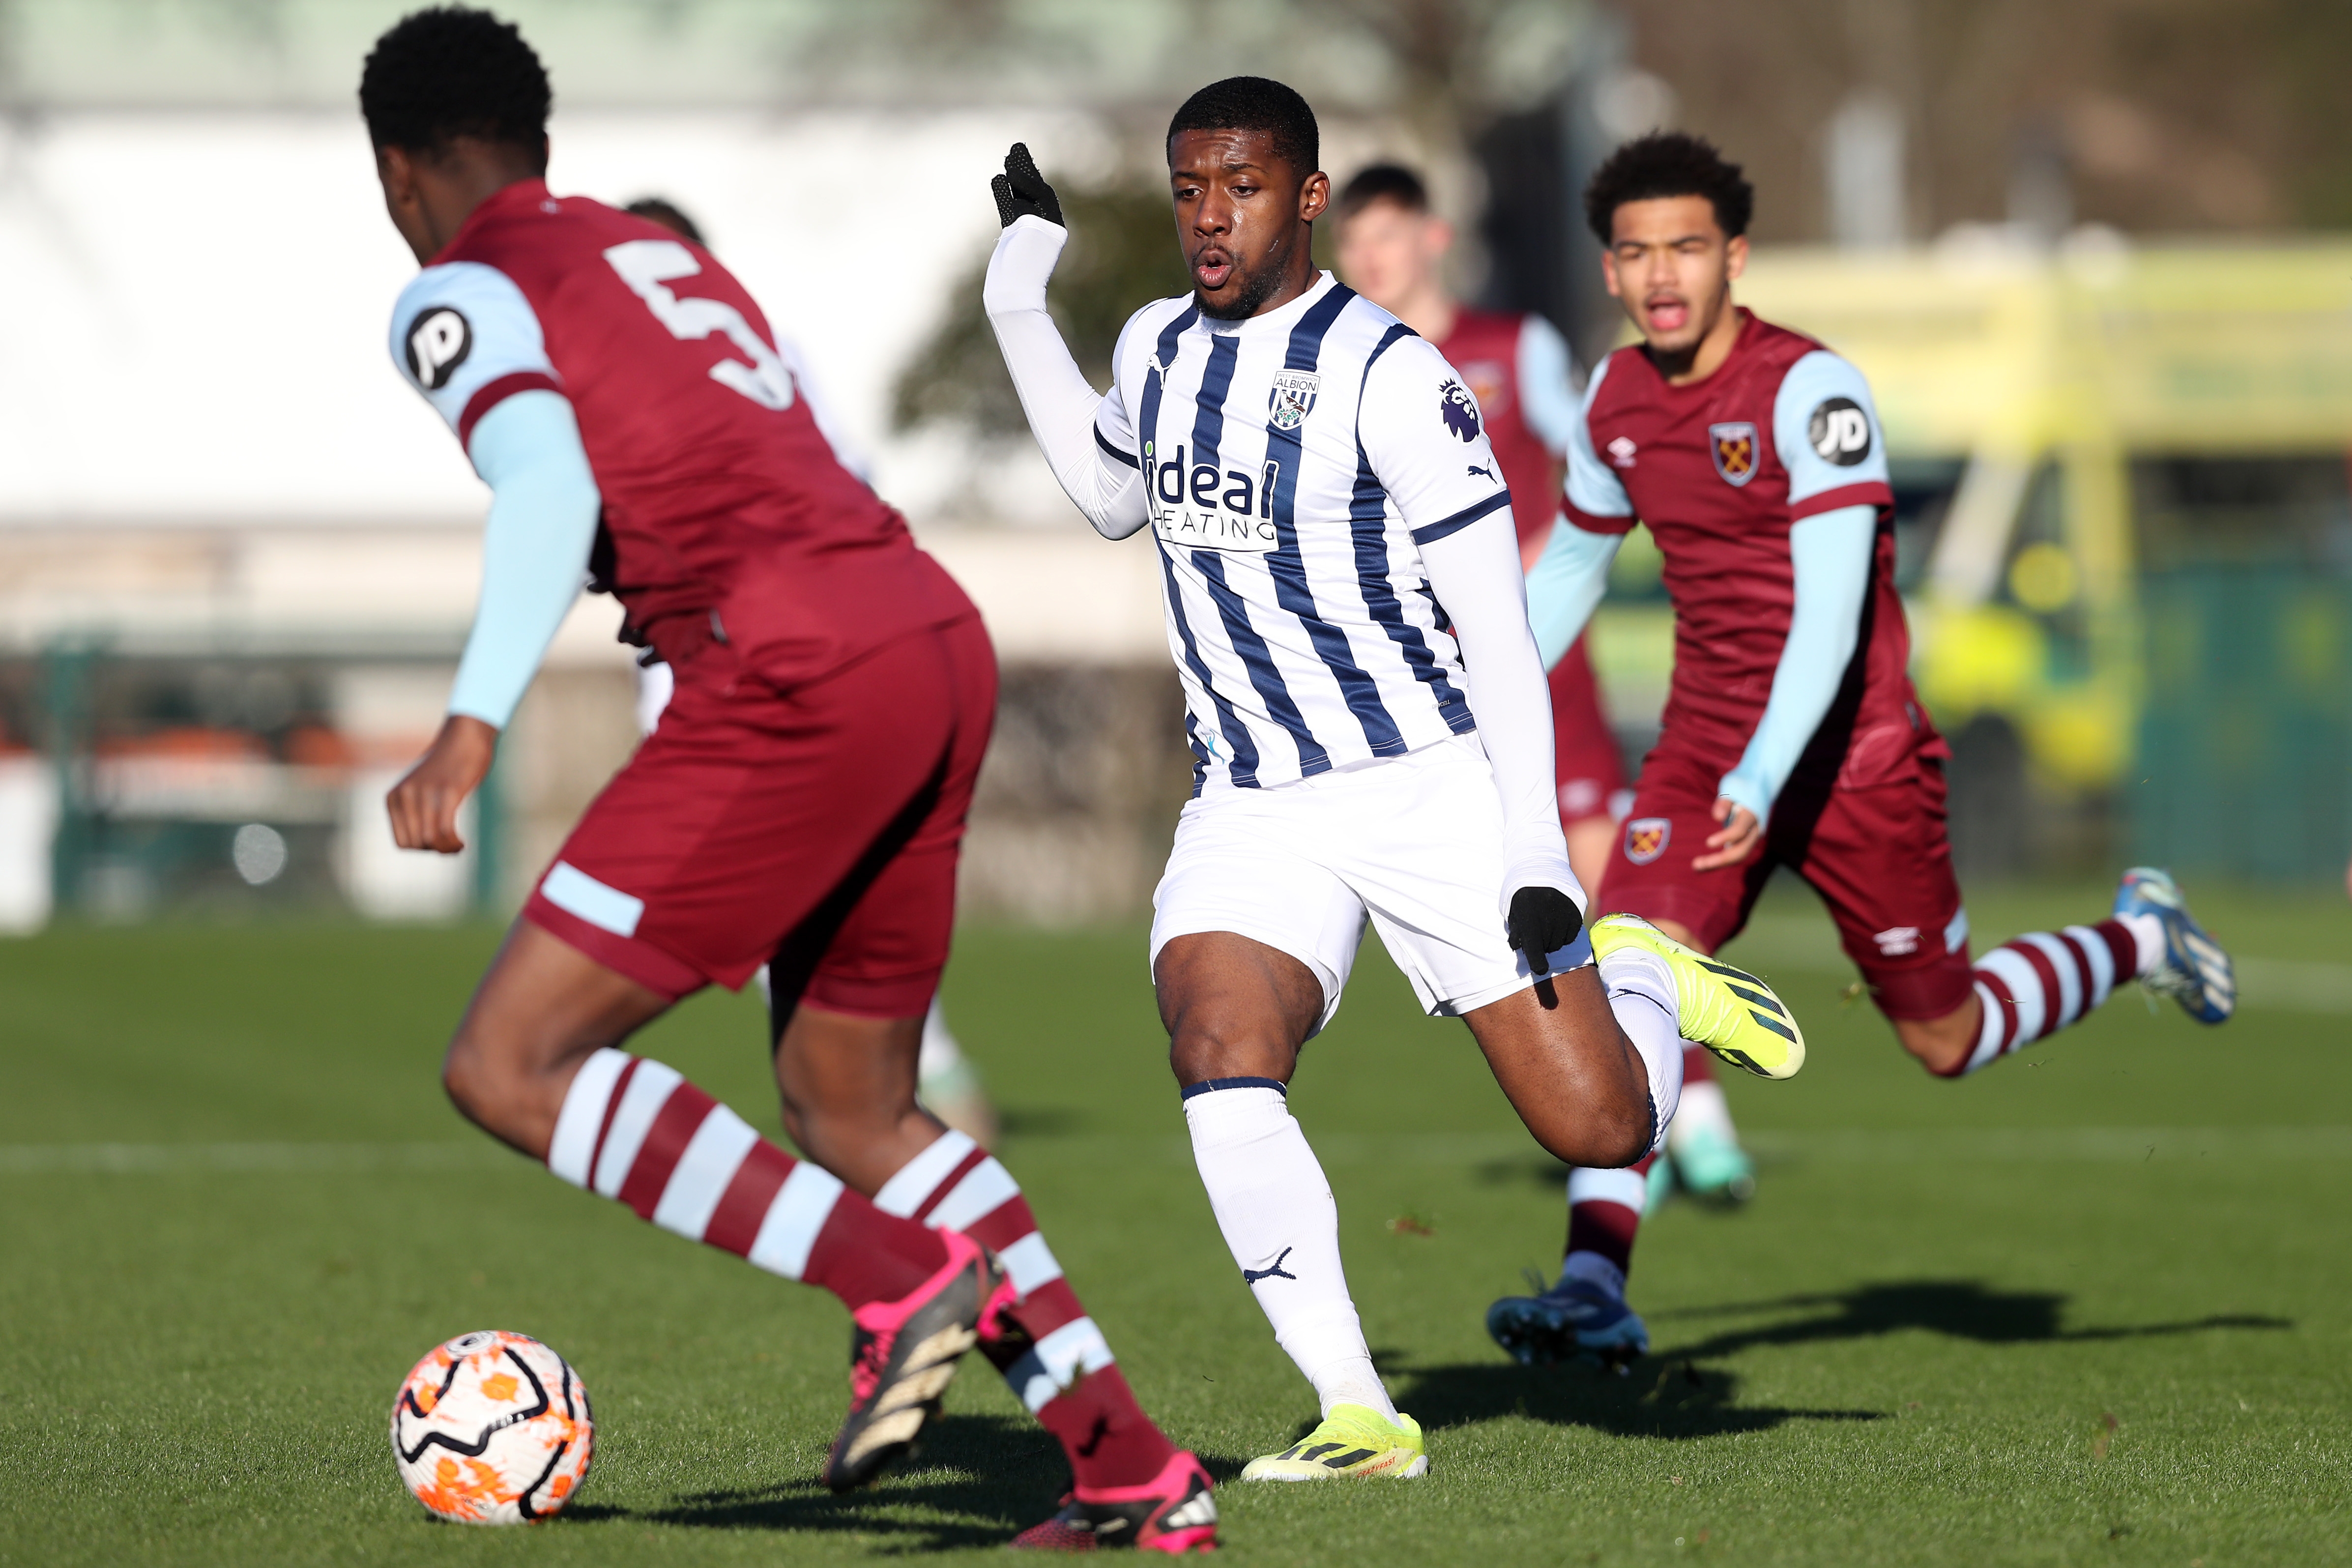 Jovan Malcolm chases down the ball against West Ham's PL2 team